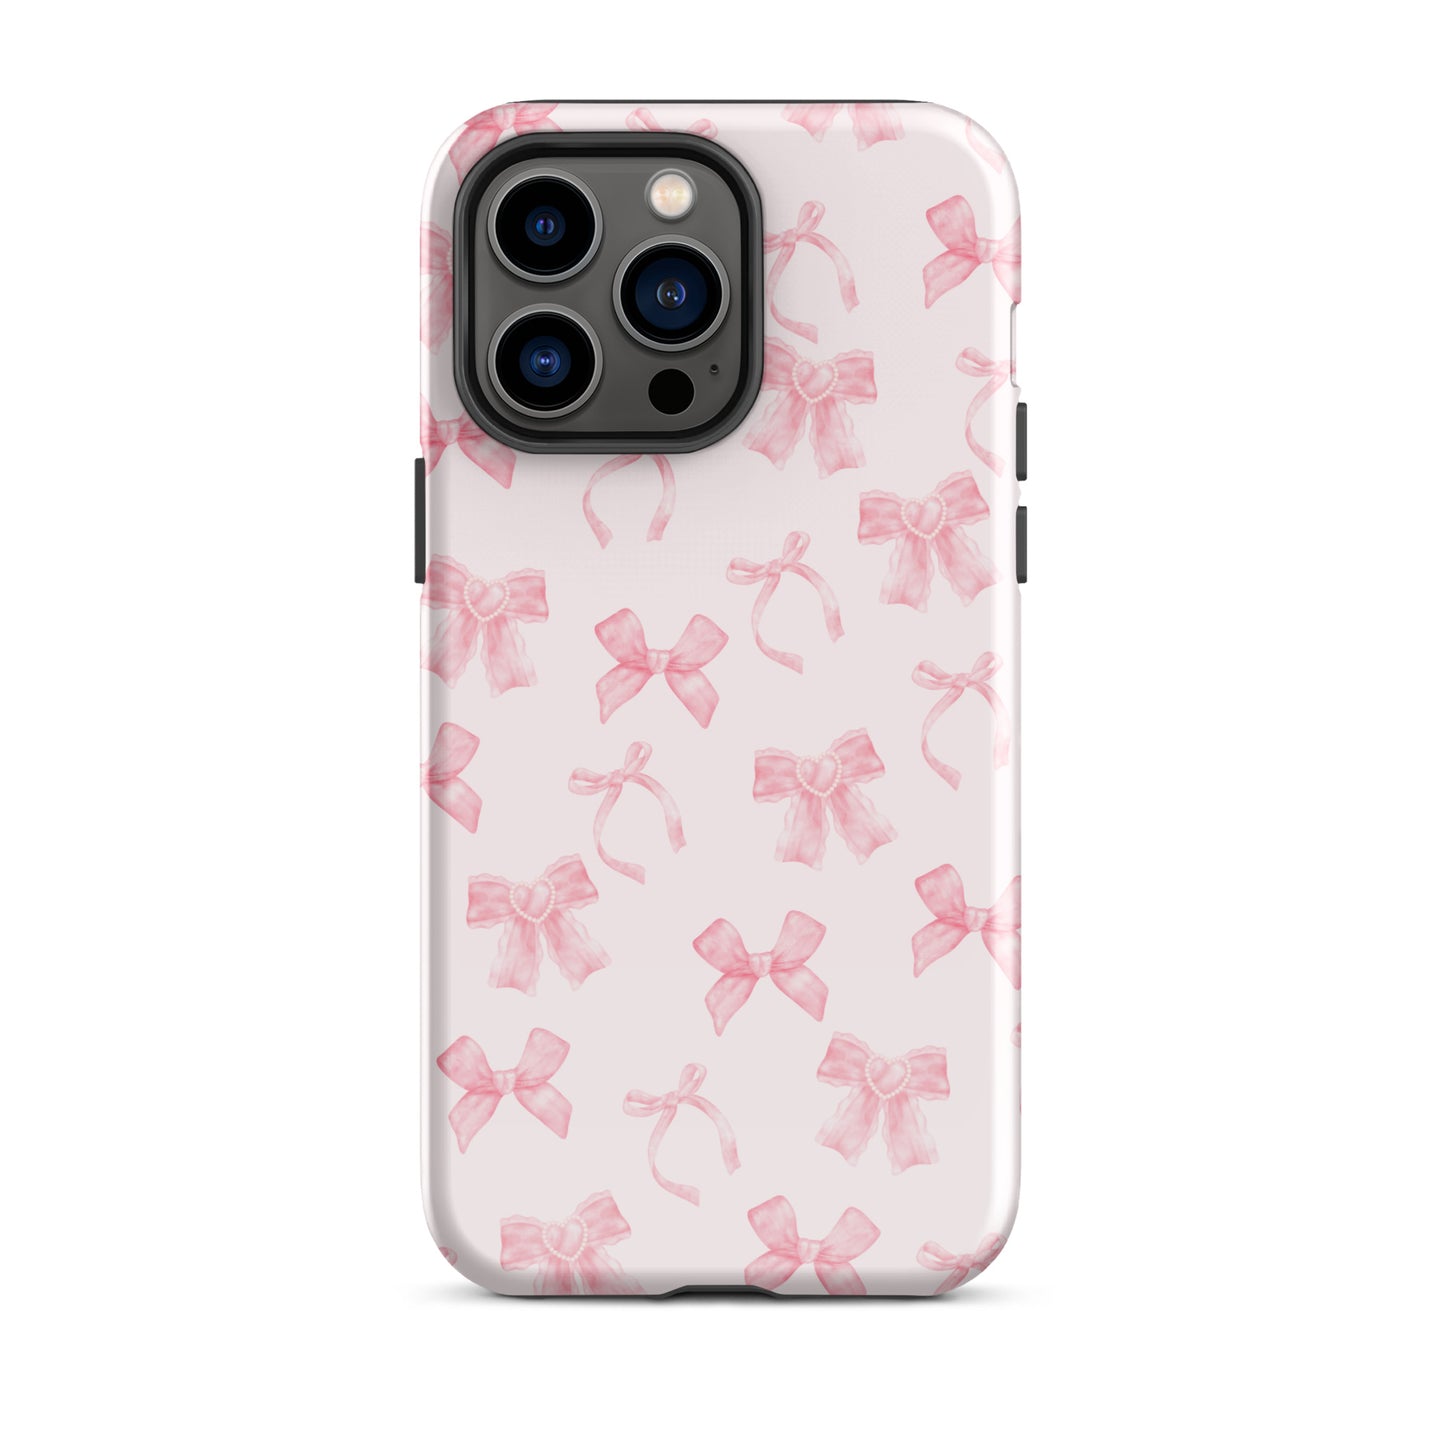 Coquette Vibes iPhone Case